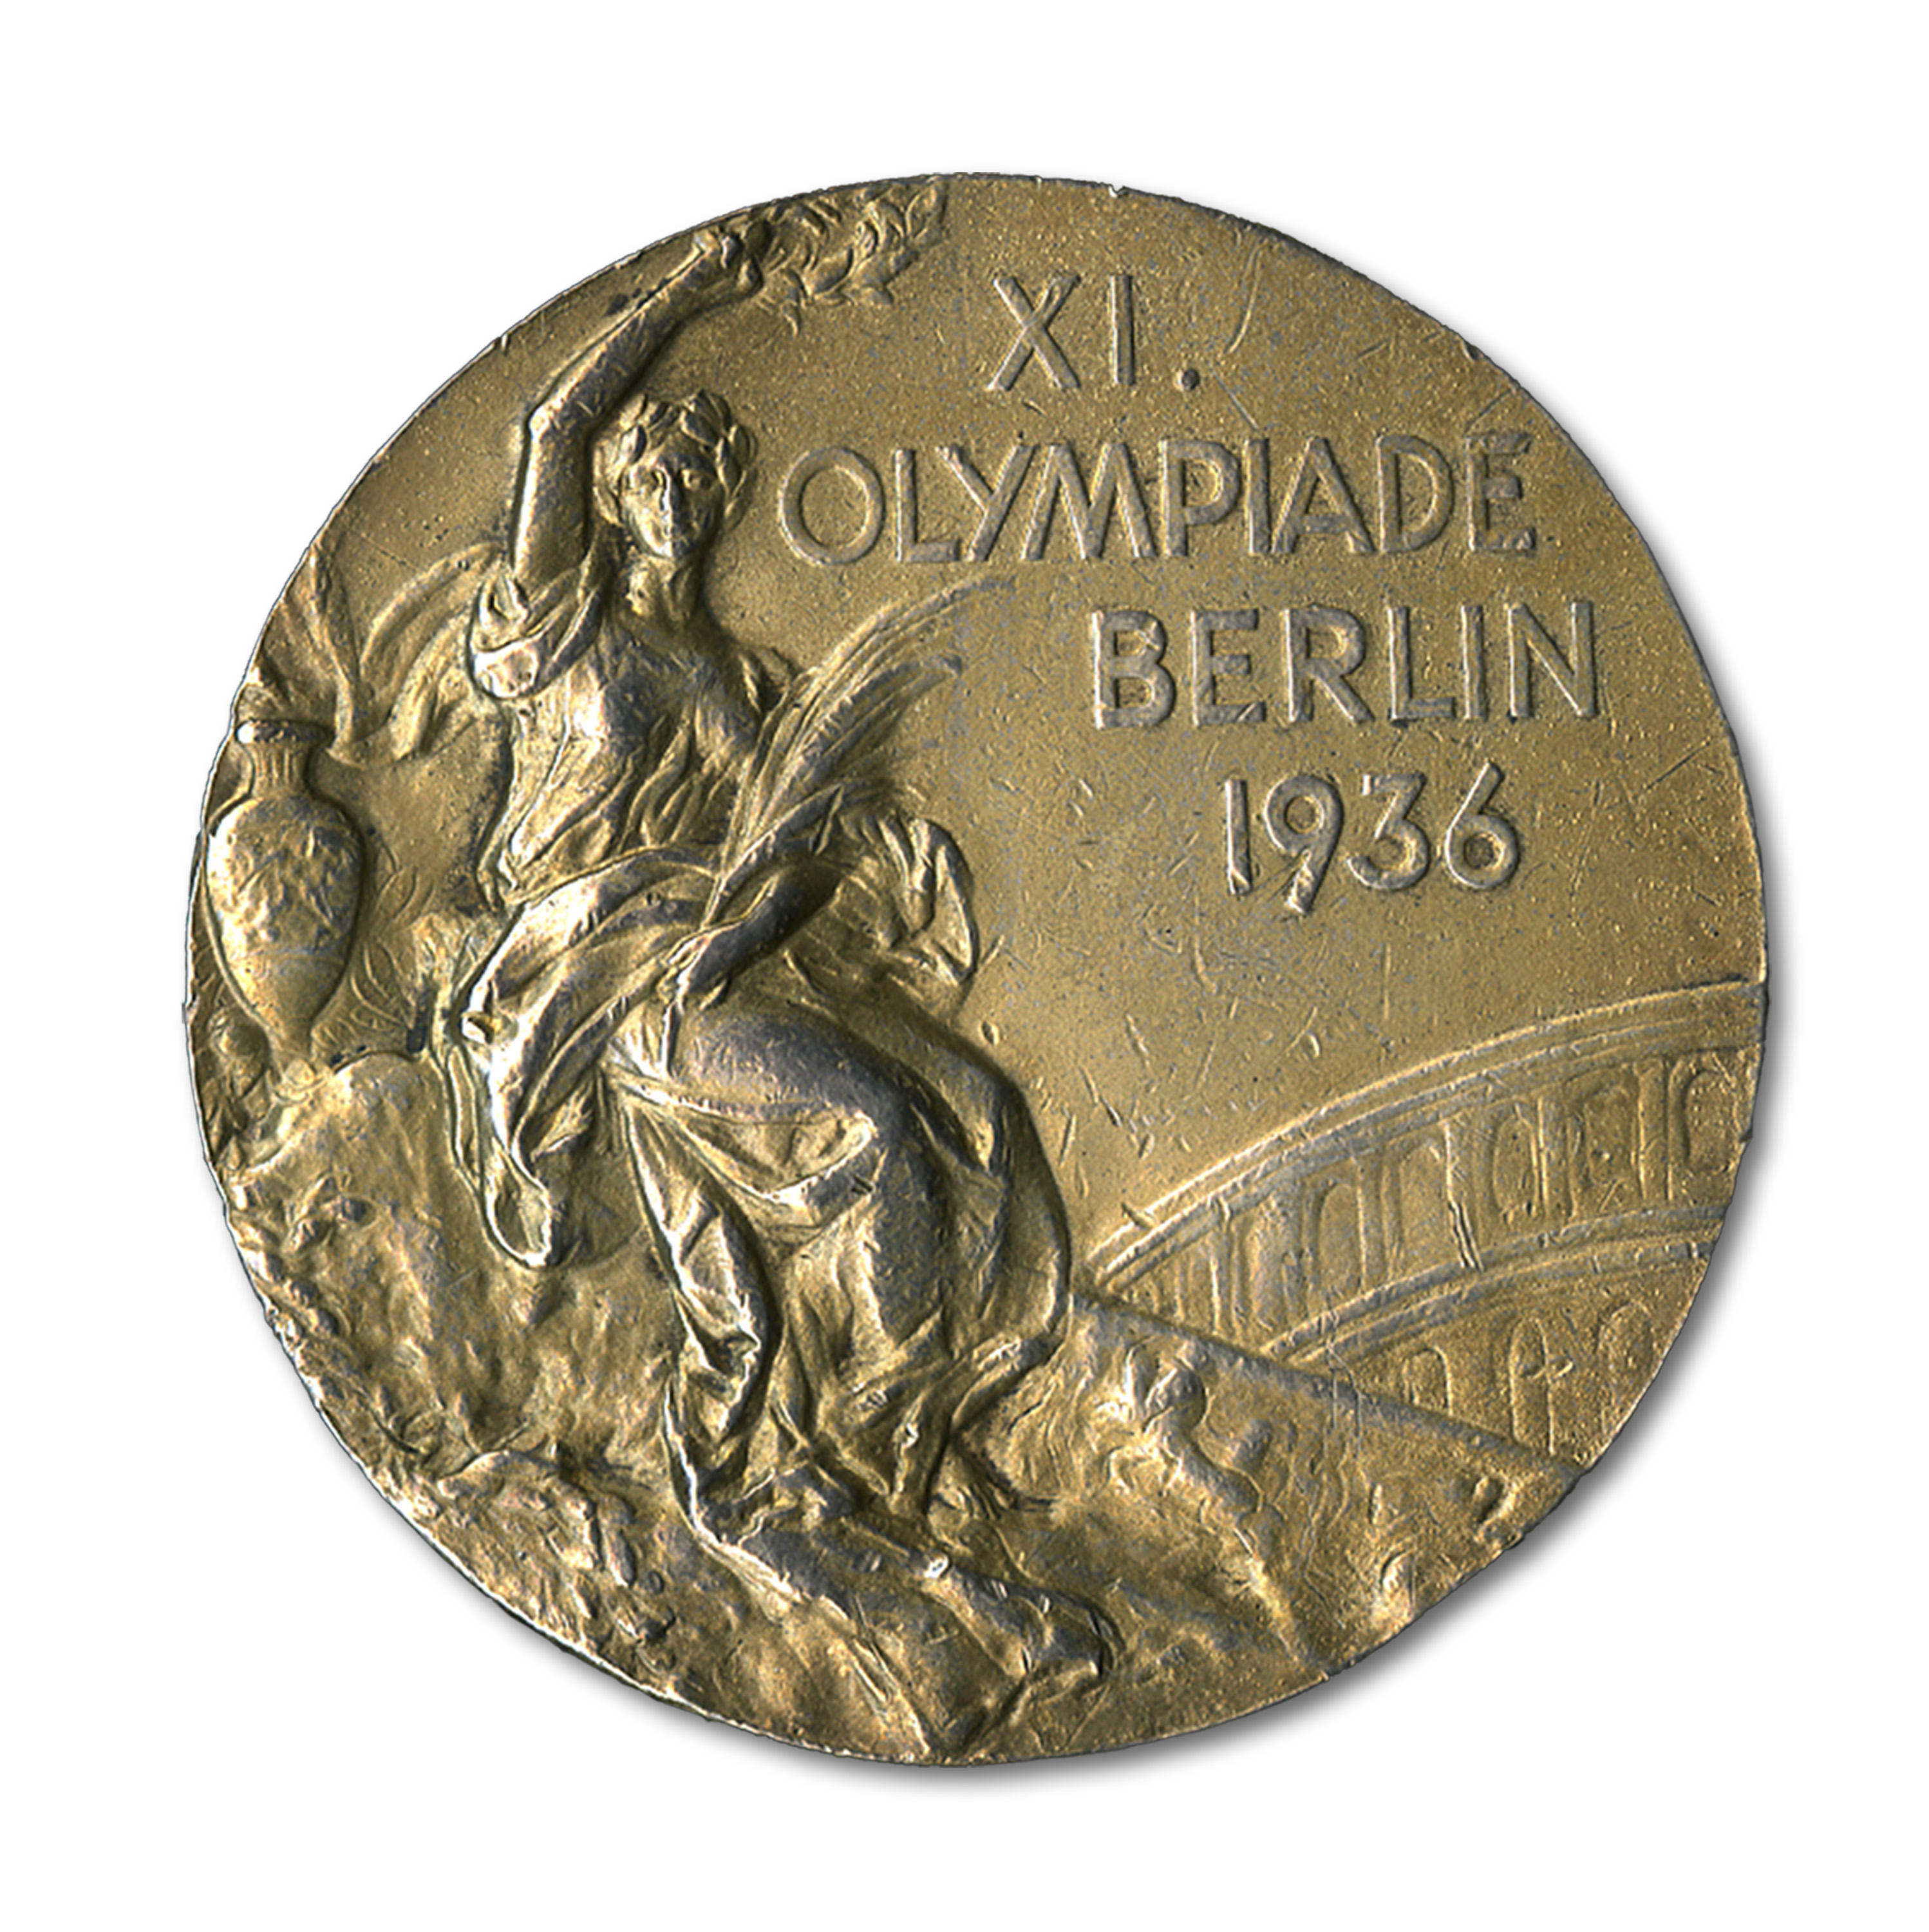 A 1936 Olympic gold medal, one of four earned by Jesse Owens during the Berlin games. SCP Auctions sold it in 2013 for $1.46 million, a world auction record for any piece of Olympic memorabilia.